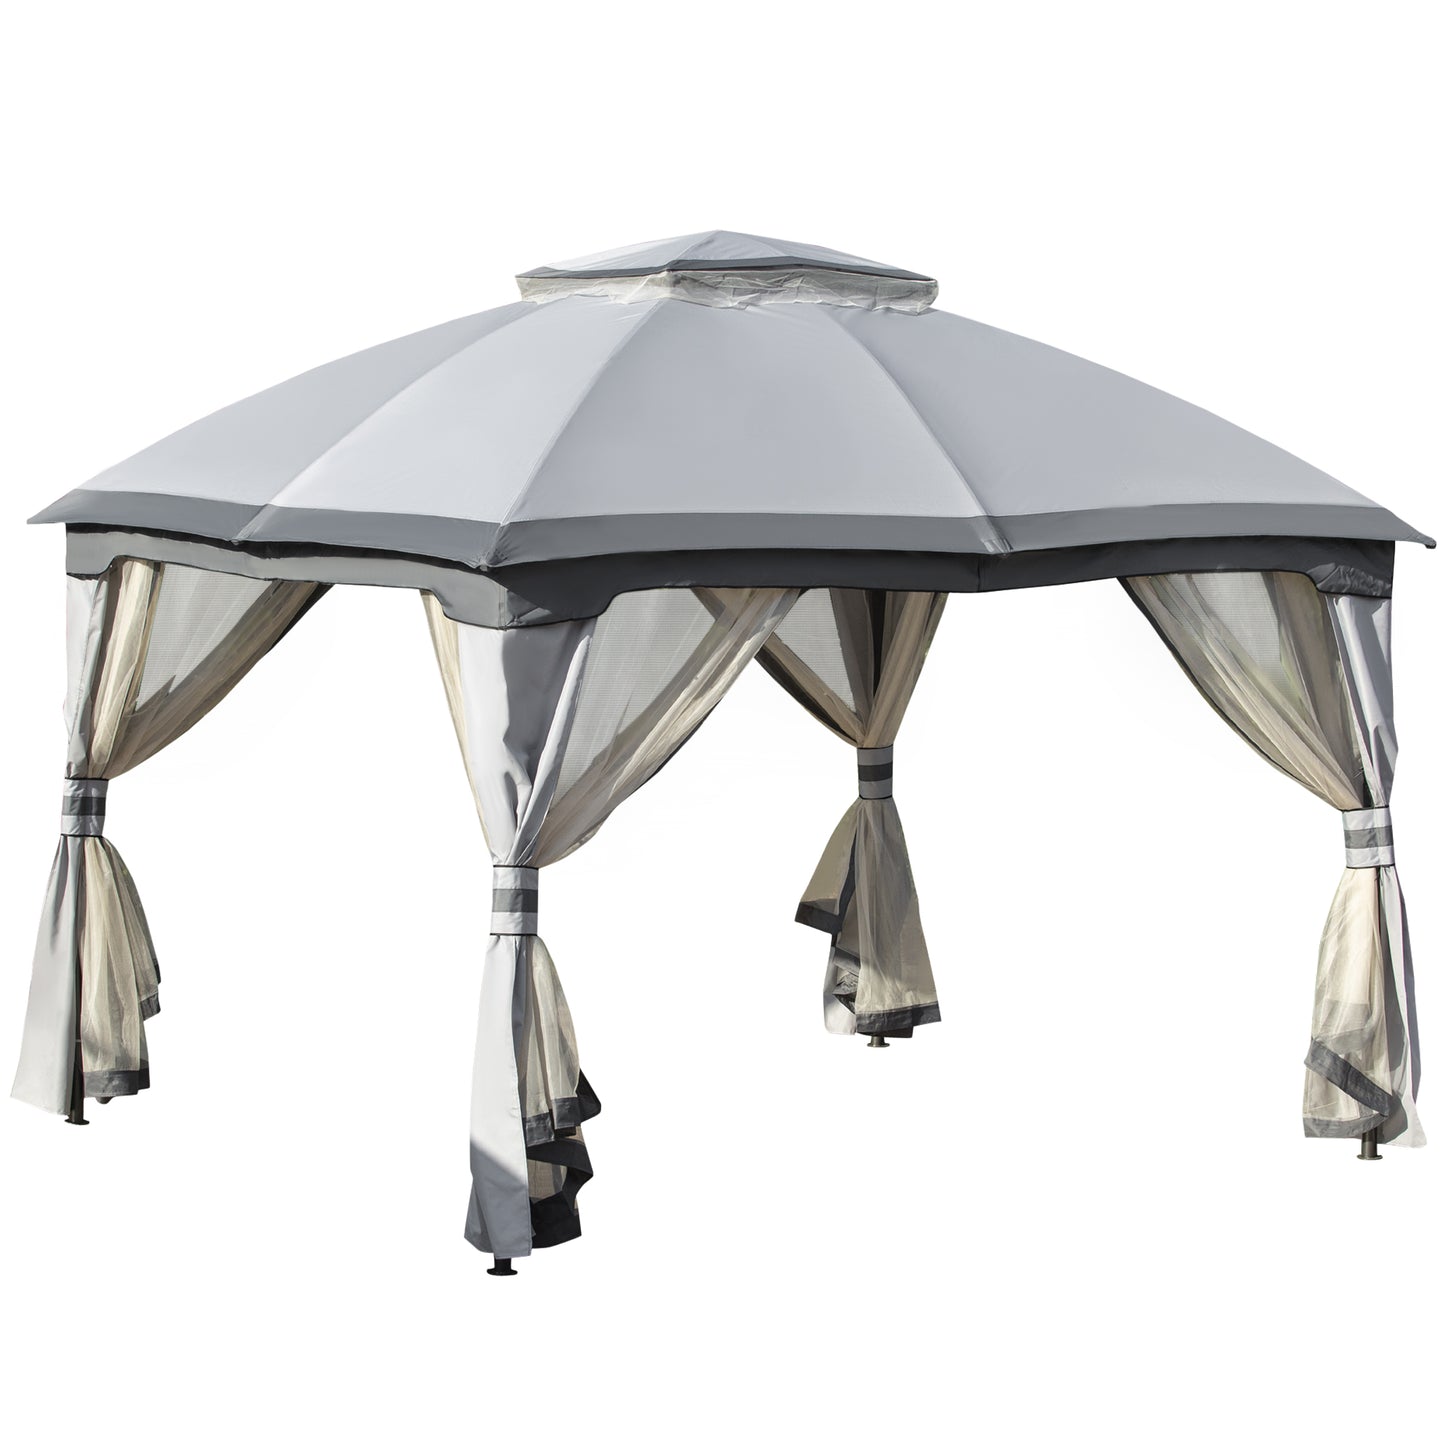 Outsunny 3.7 x 3(m) Metal Gazebo Canopy Party Tent Garden Patio Shelter with Netting Sidewalls & Double Tiered Roof, Grey